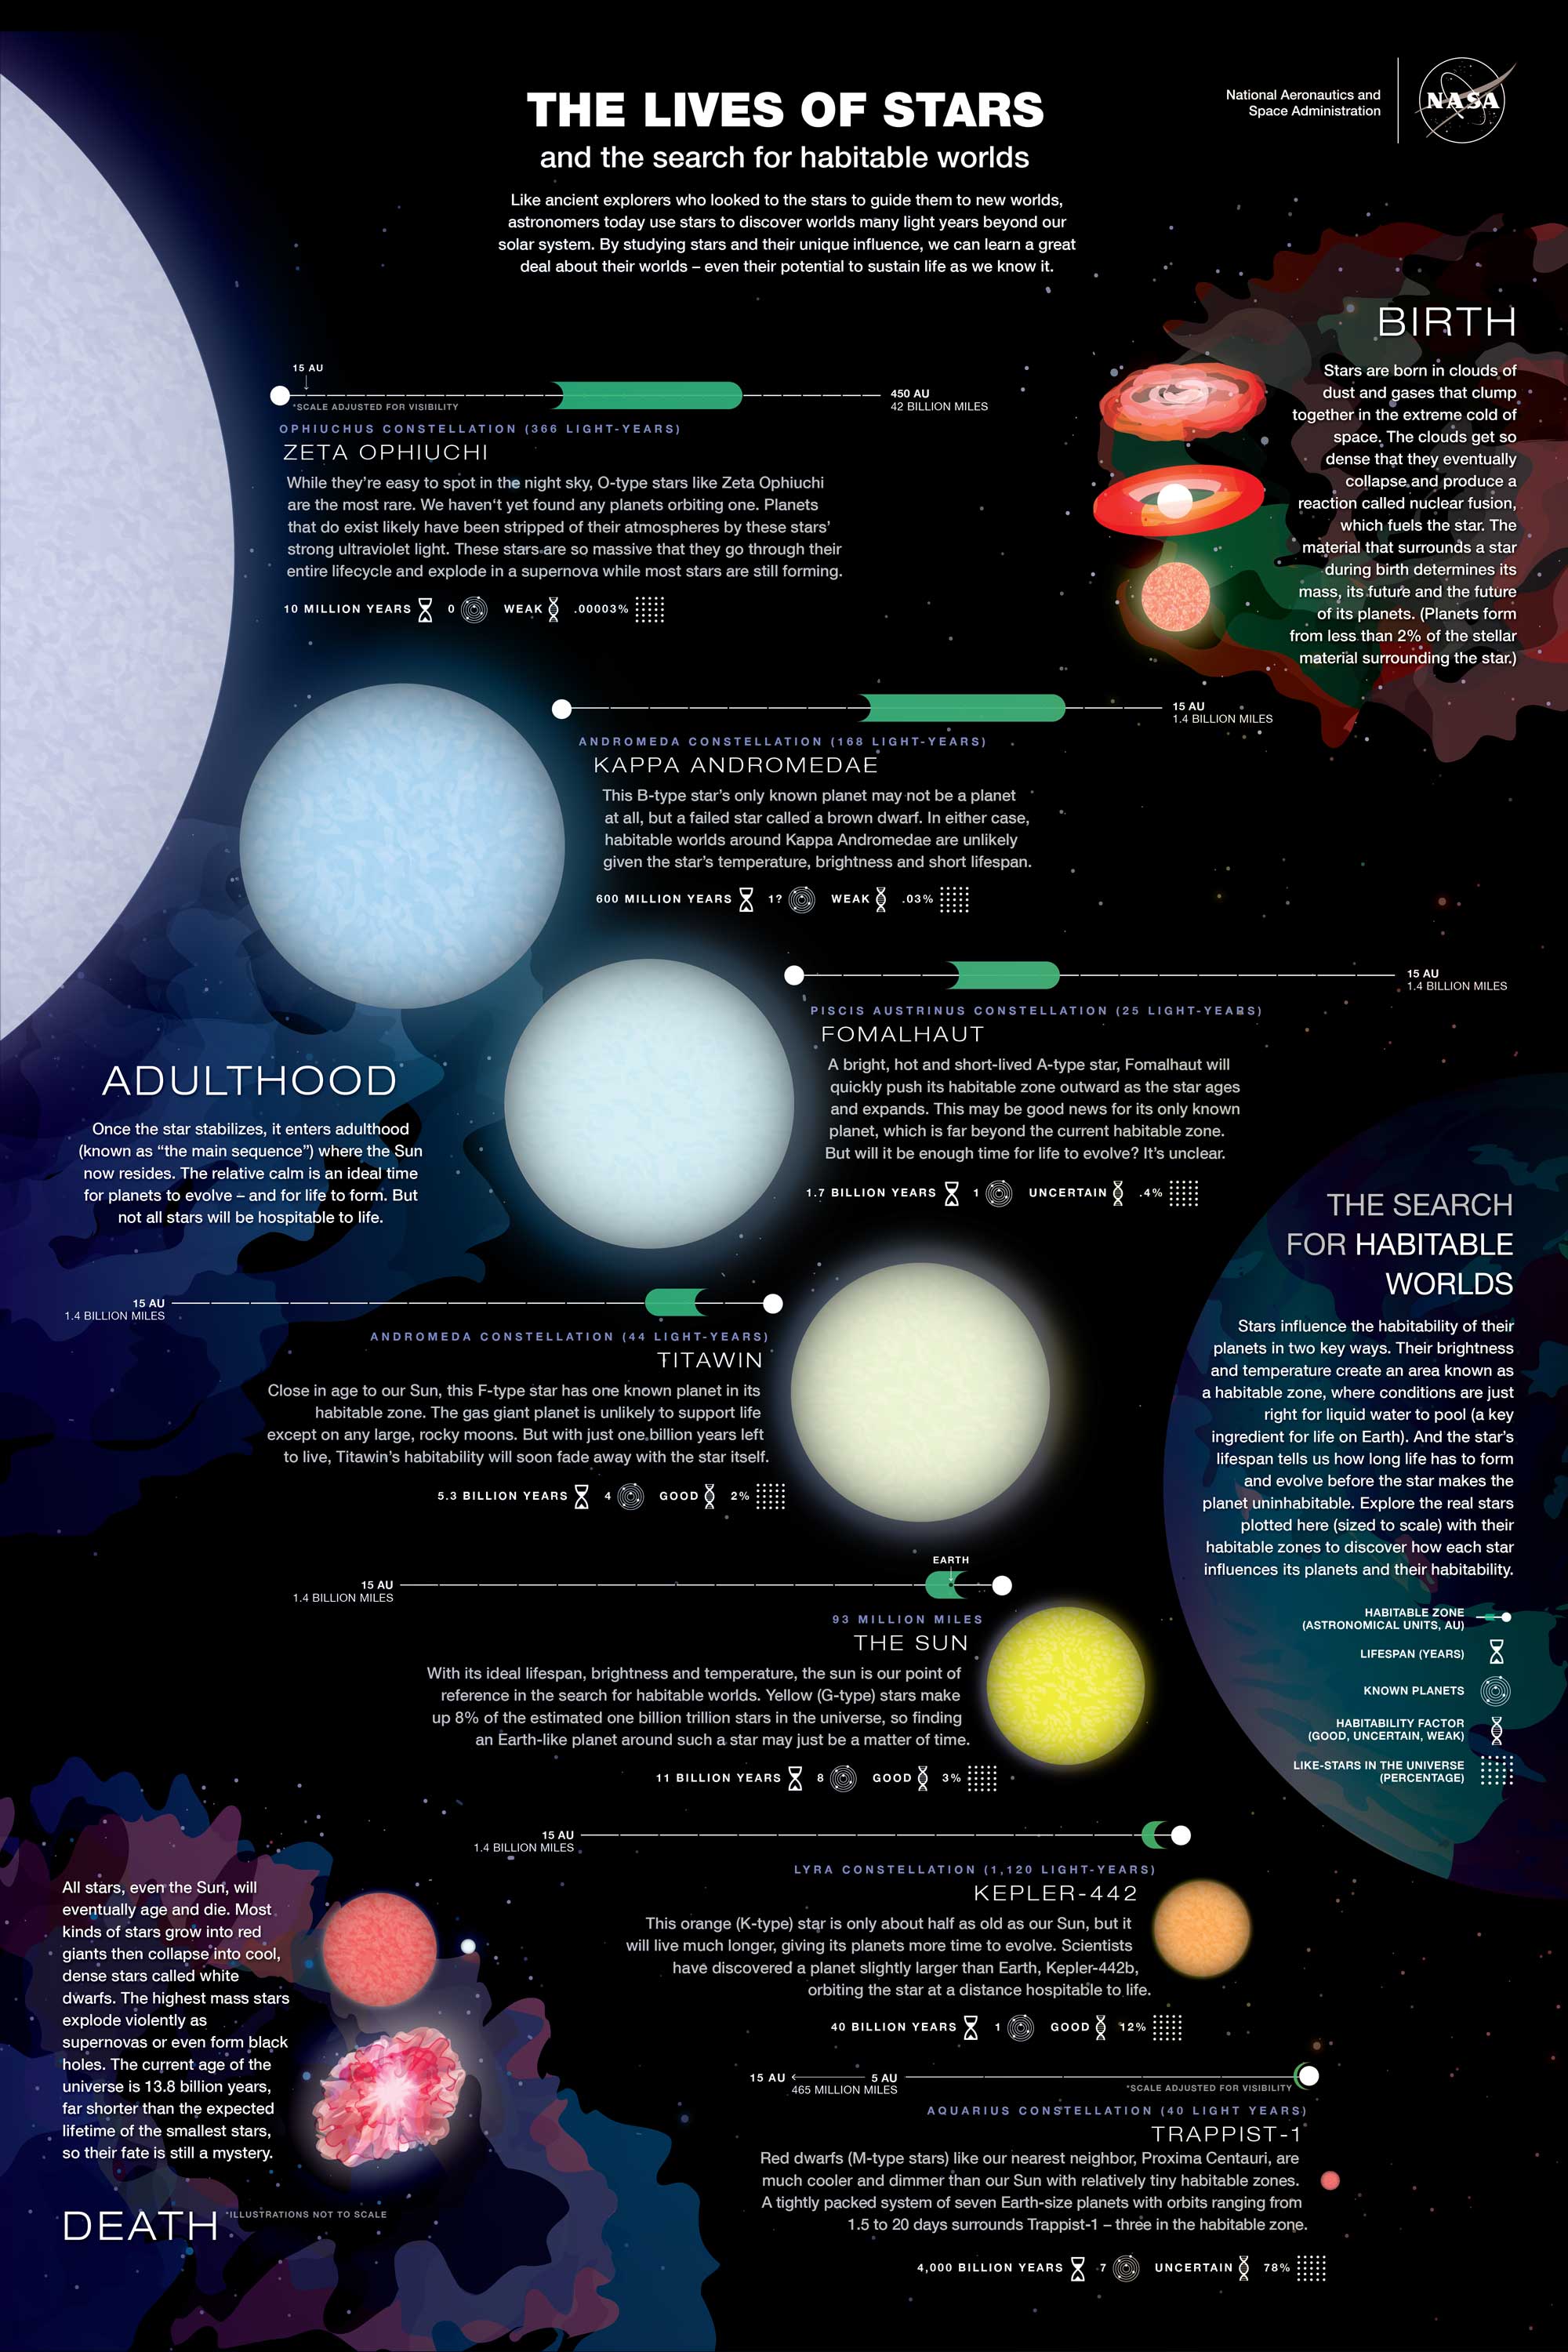 Lives of Stars infographic